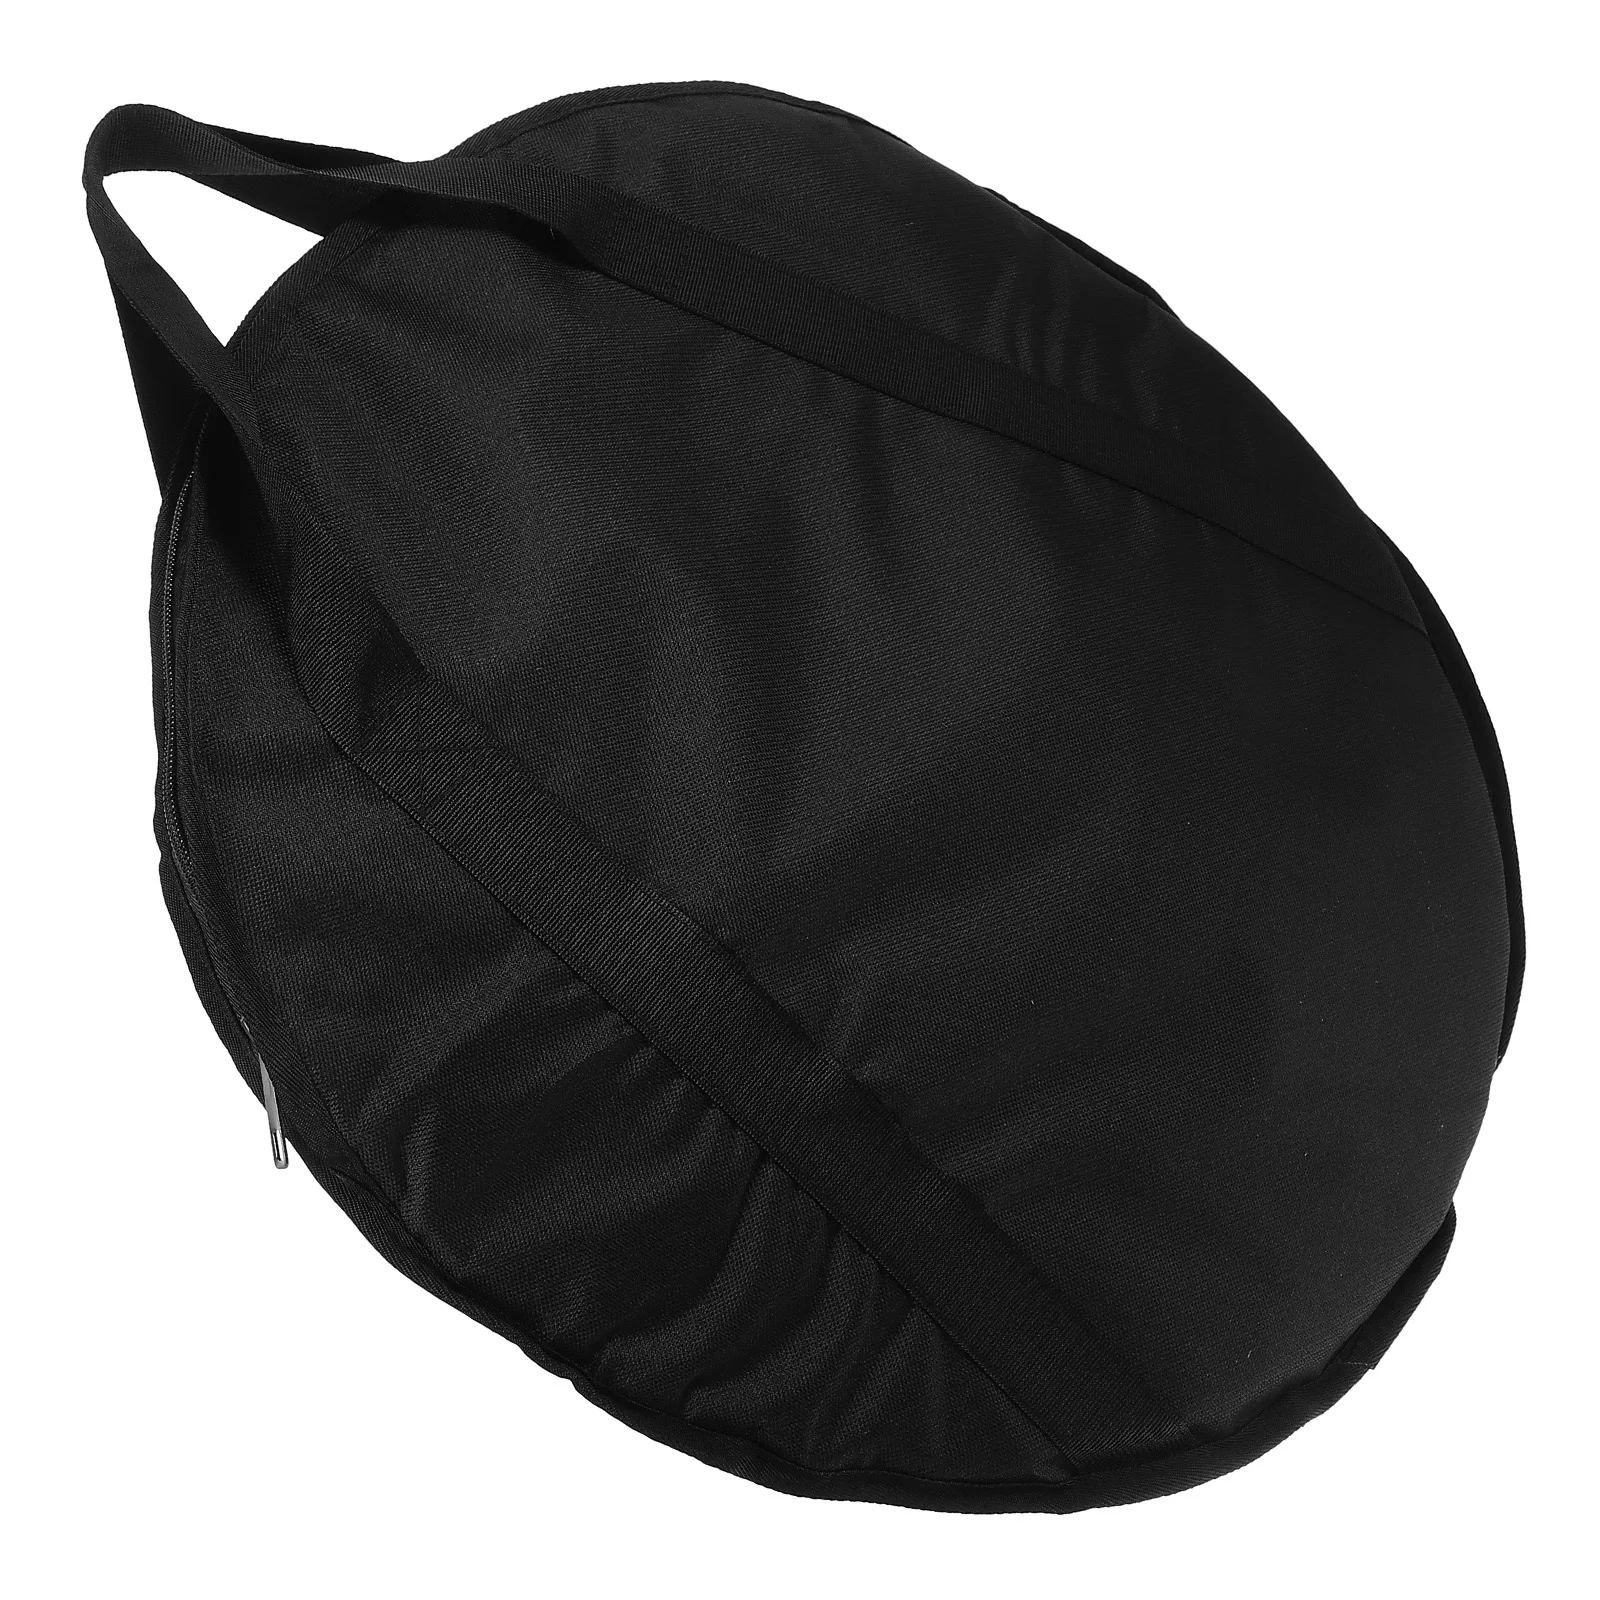 

Round Storage Bag Instrument Pouch Travel Toiletry Cotton Cymbal Backpack Carrying Case Cable Waterproof Backpack For Travels